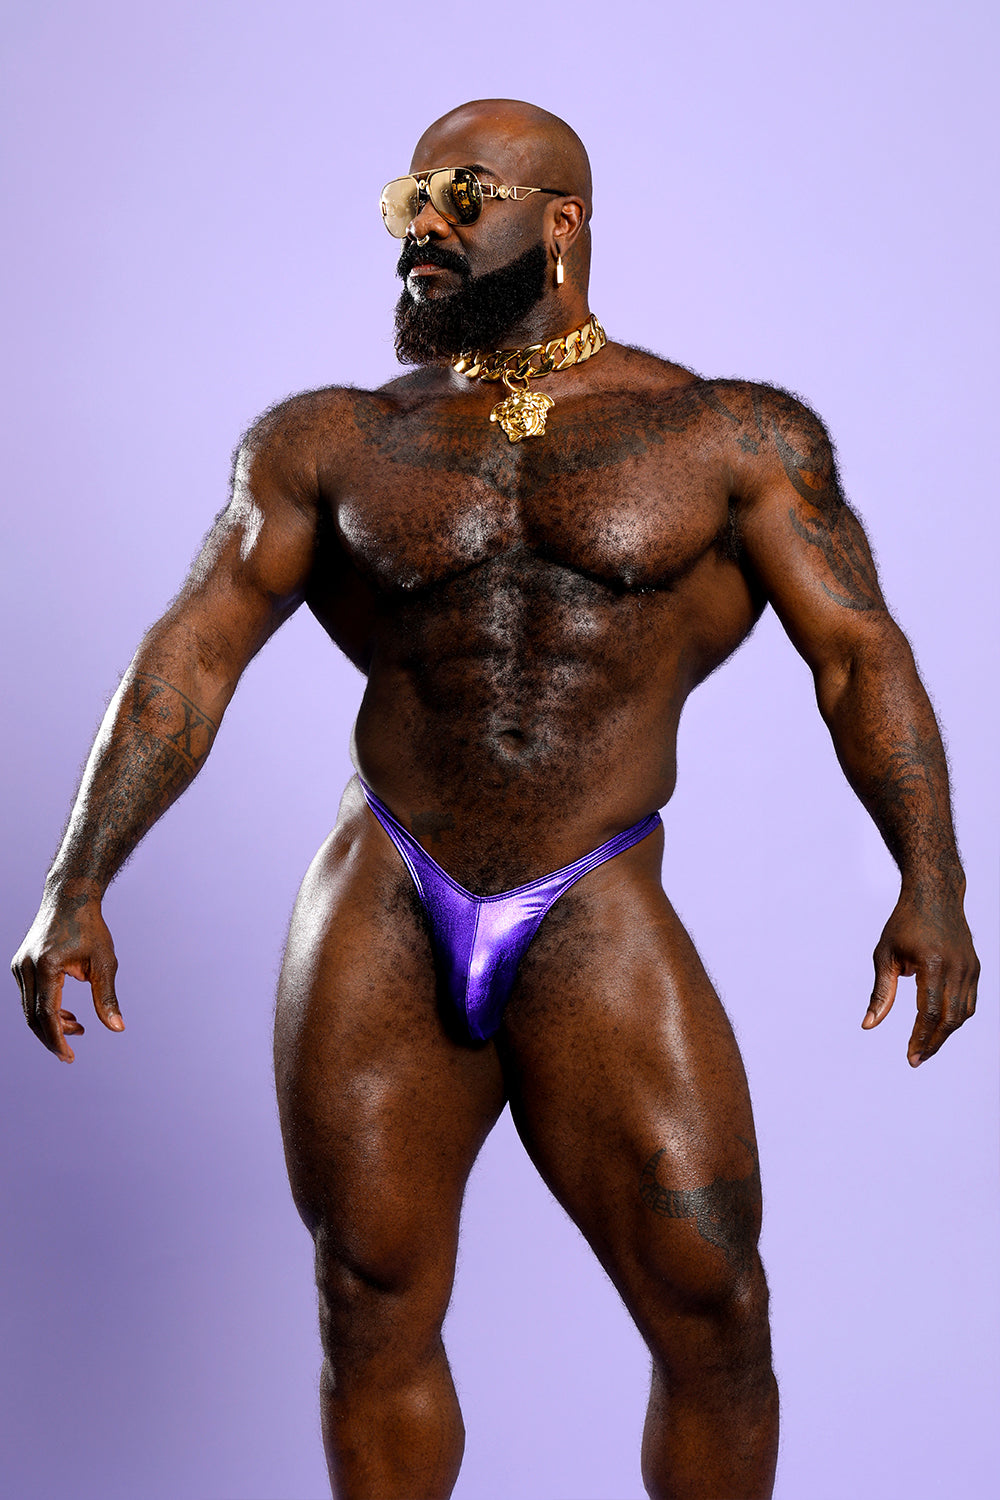 Cadbury Thong Swimsuit (Medium on Pre-Order, ship mid May) Other sizes in stock)